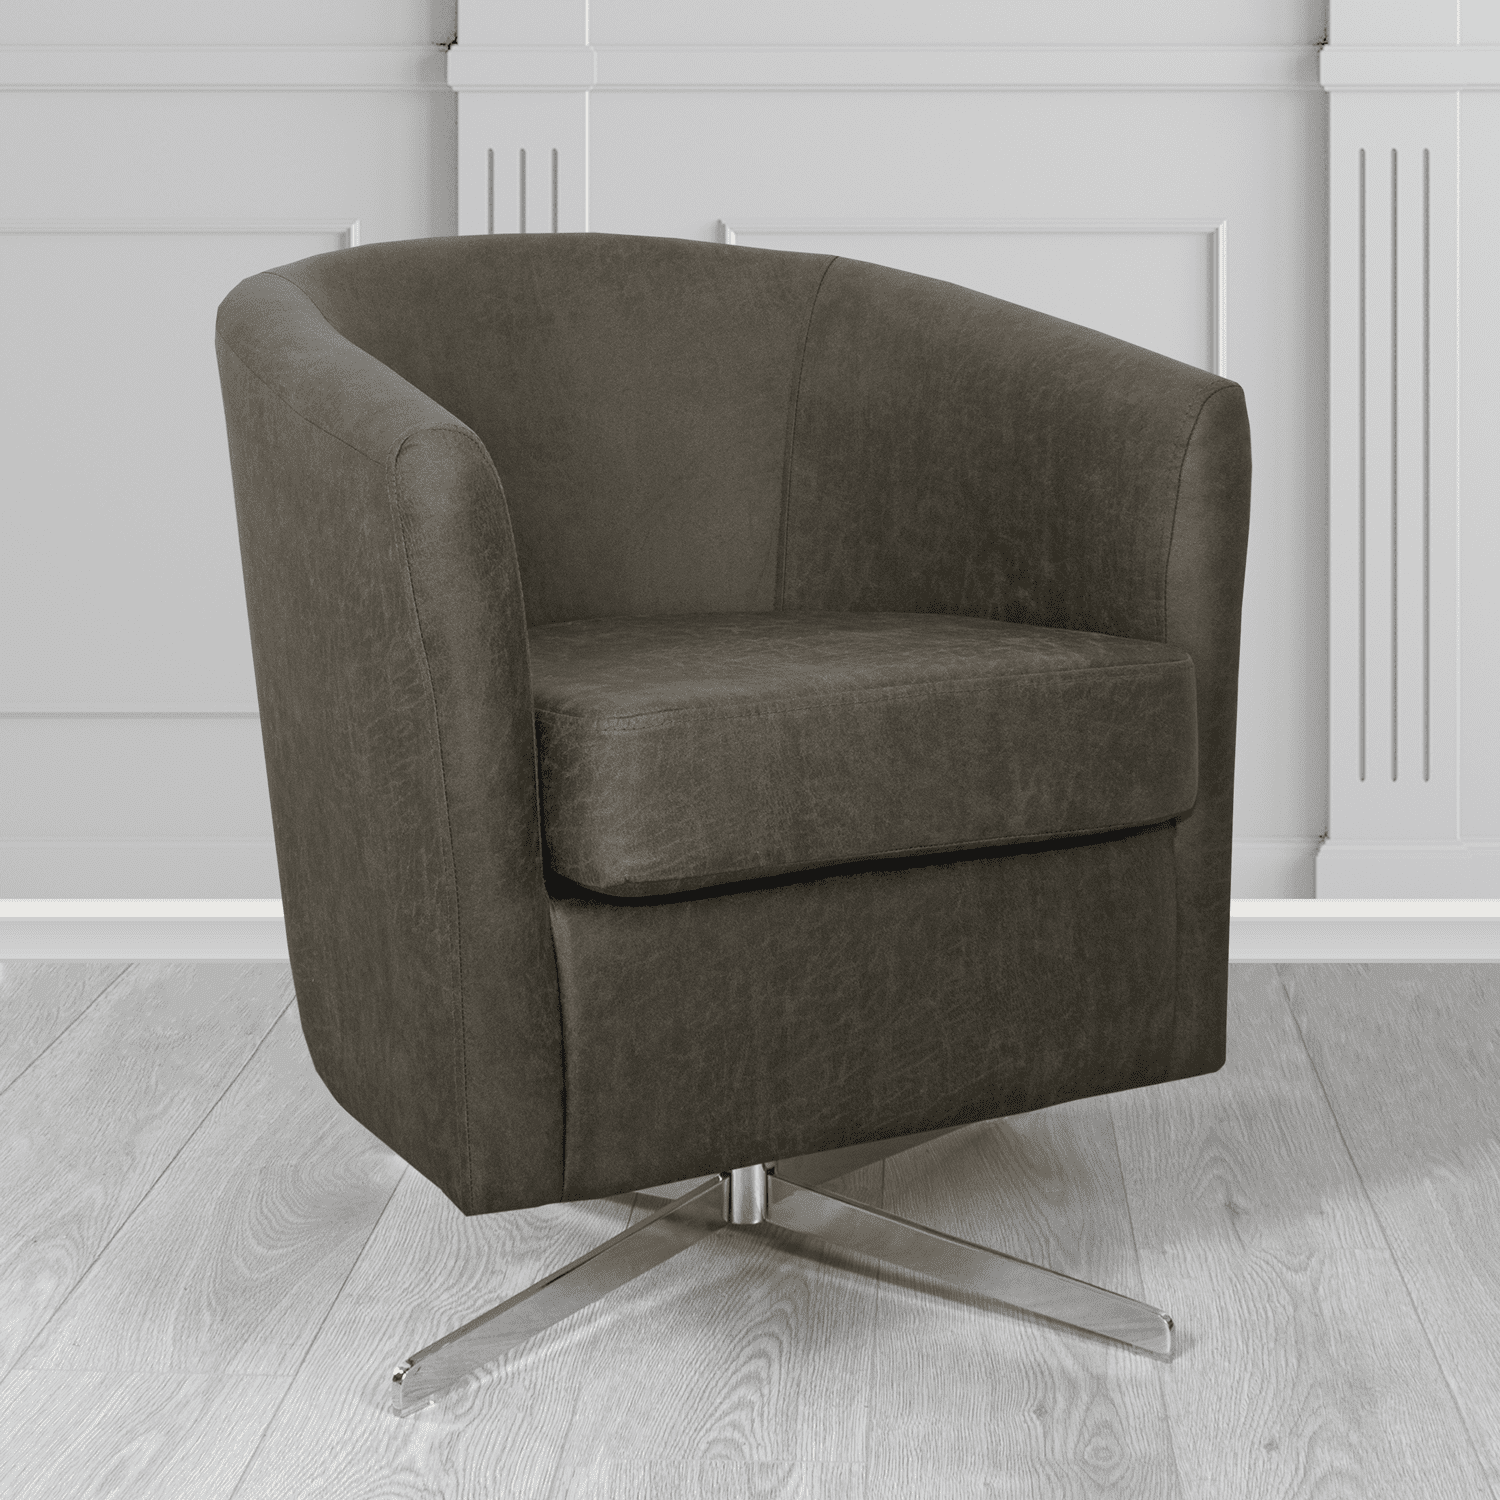 Cannes Swivel Tub Chair in Nevada Charcoal Faux Leather - The Tub Chair Shop